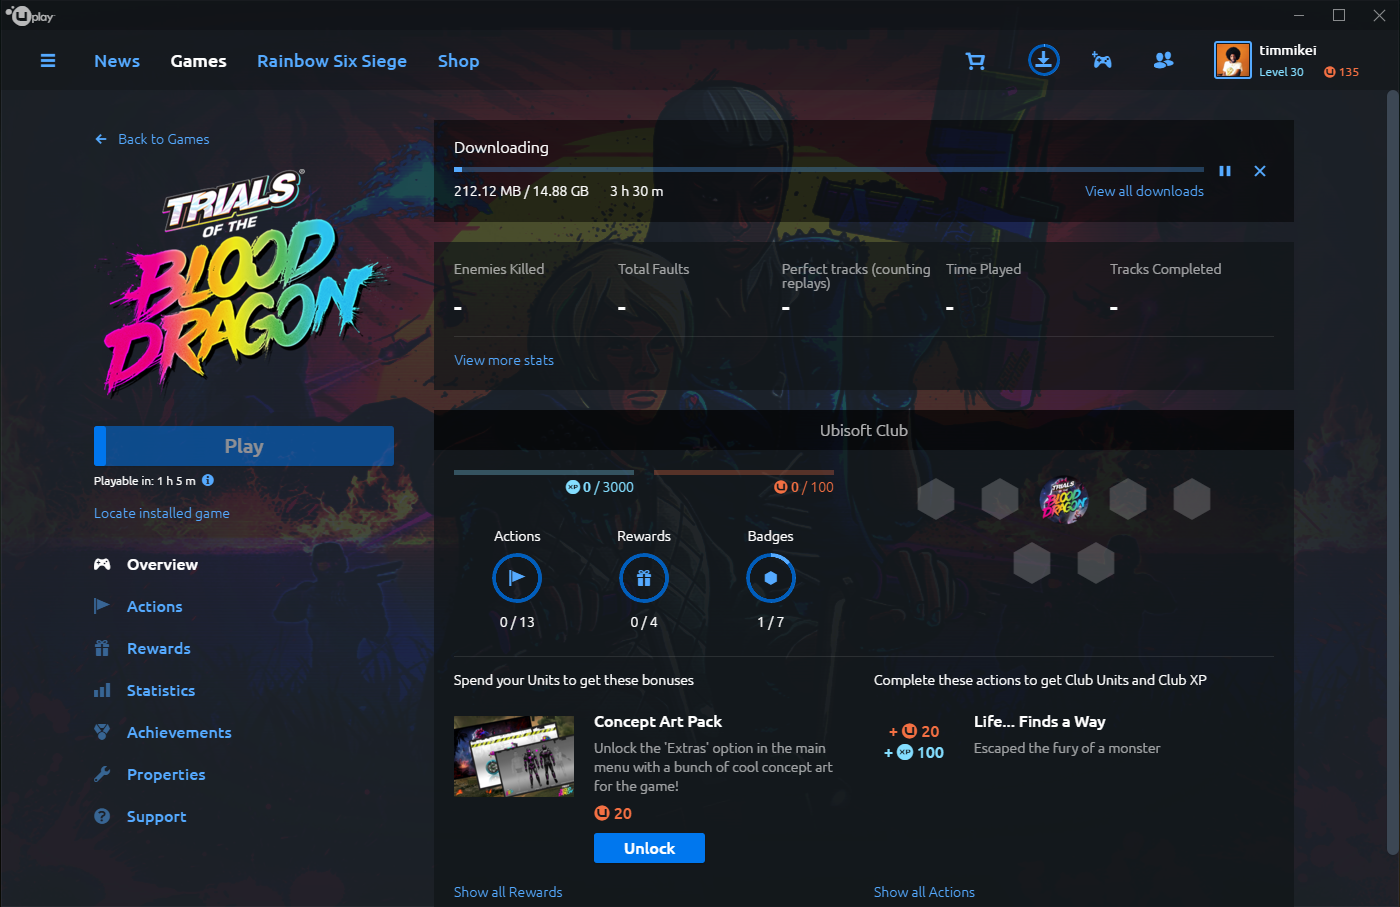 Uplay PC: The Crew game page